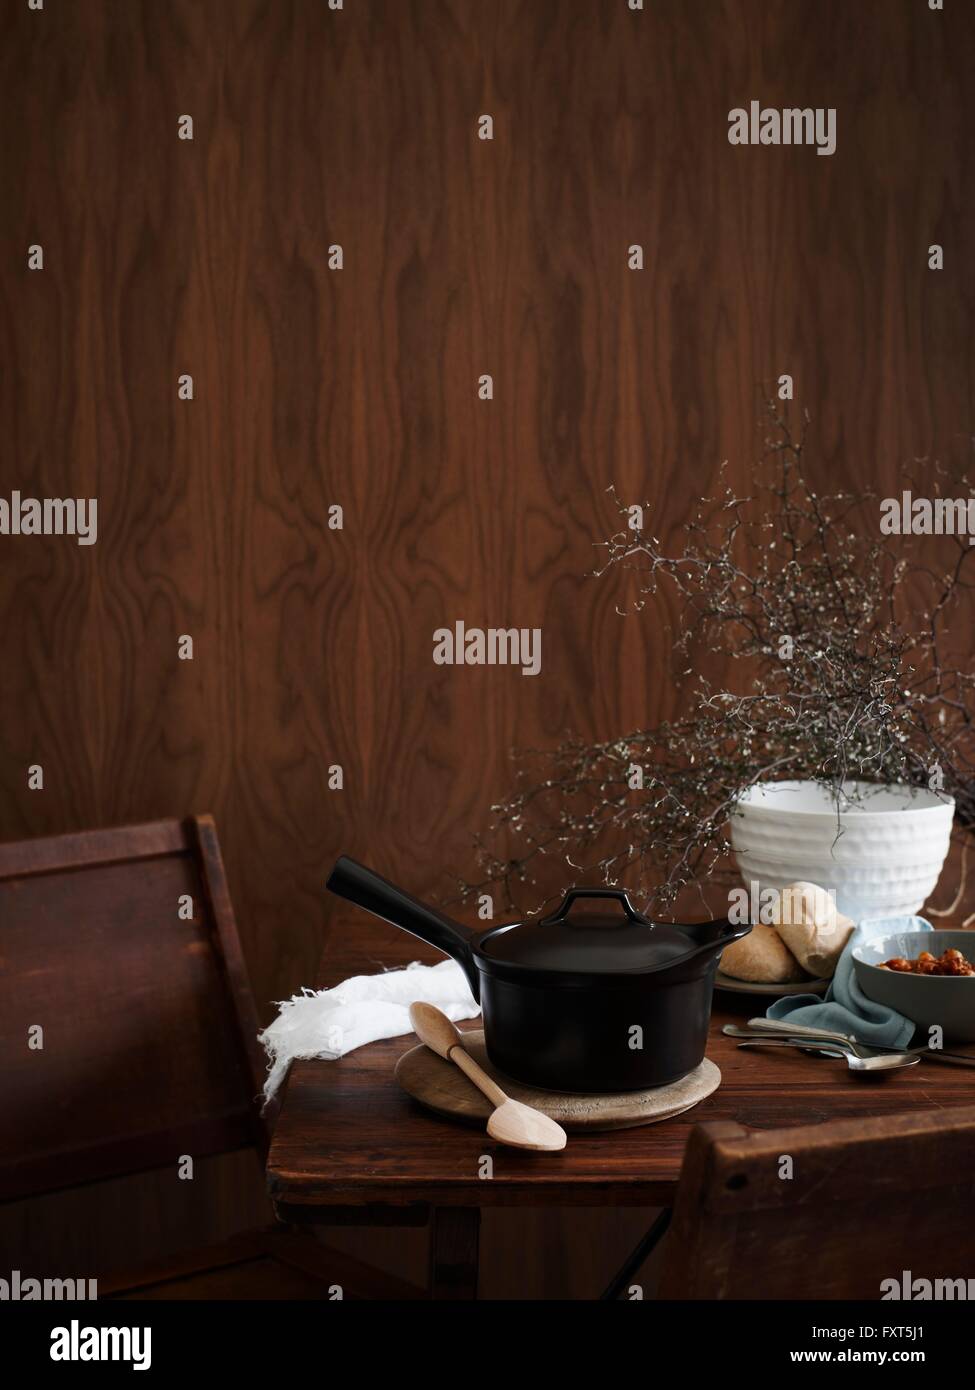 Saucepan on table with wooden spoon Stock Photo